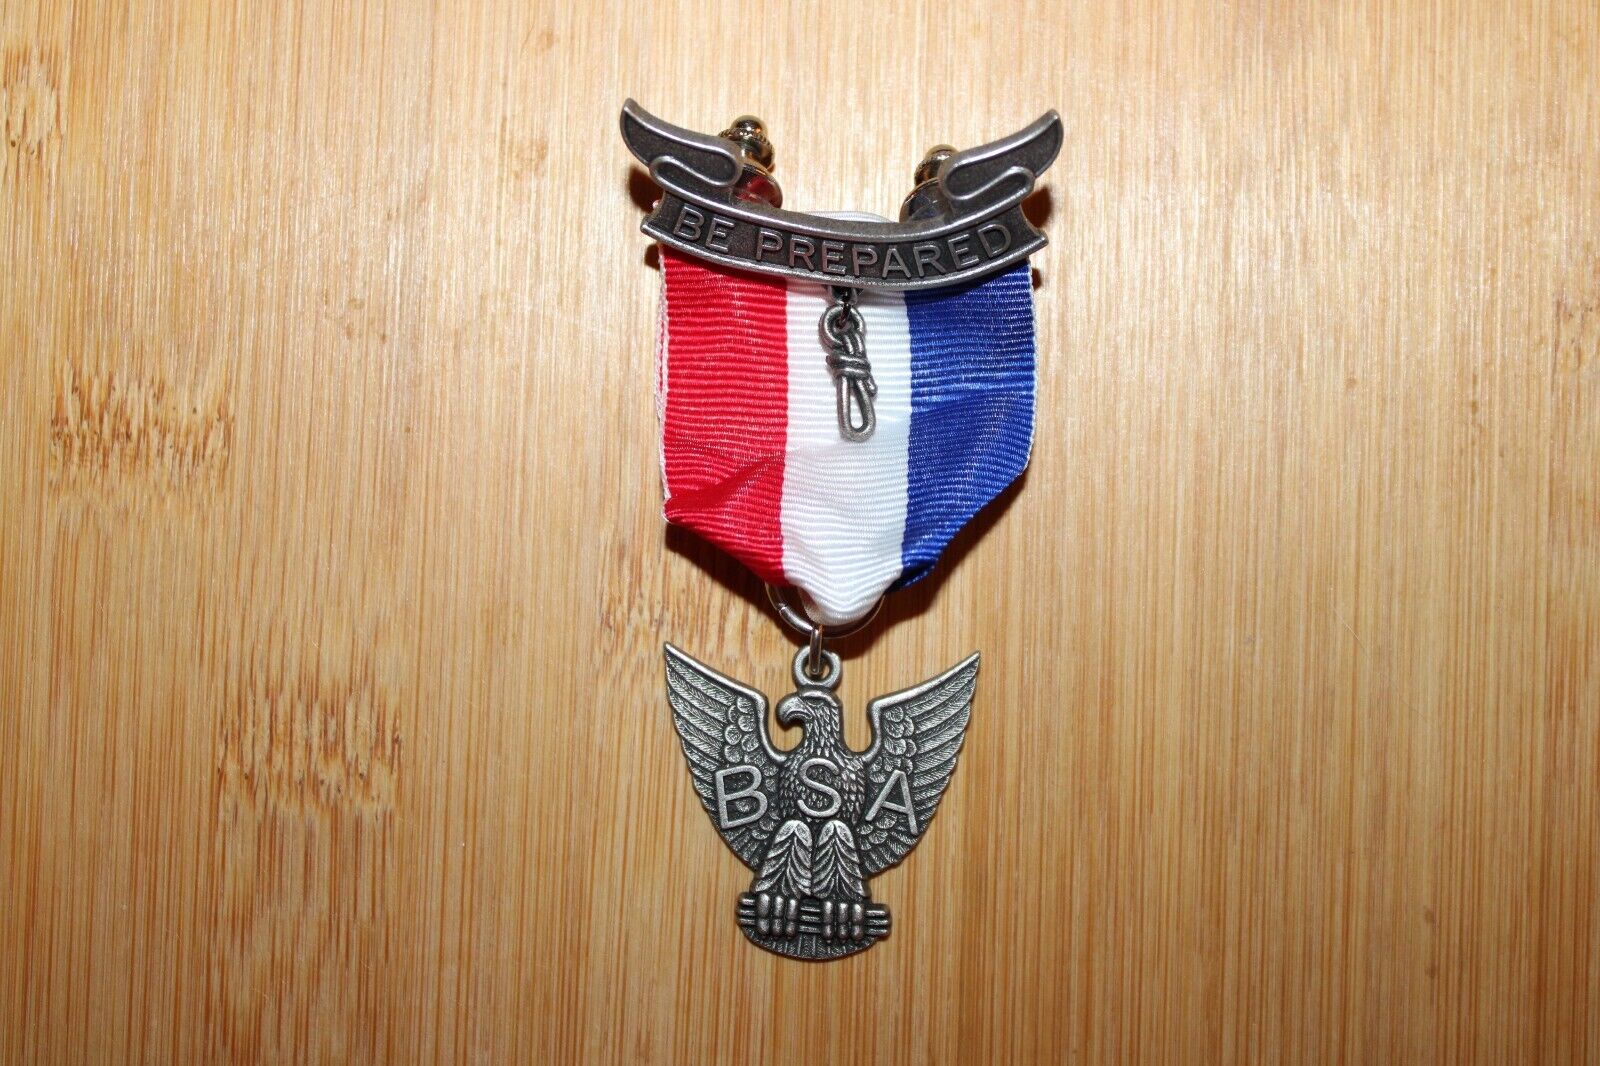 Boy Scouts of America BSA Eagle Scout Be Prepared Silver Medal and Ribbon